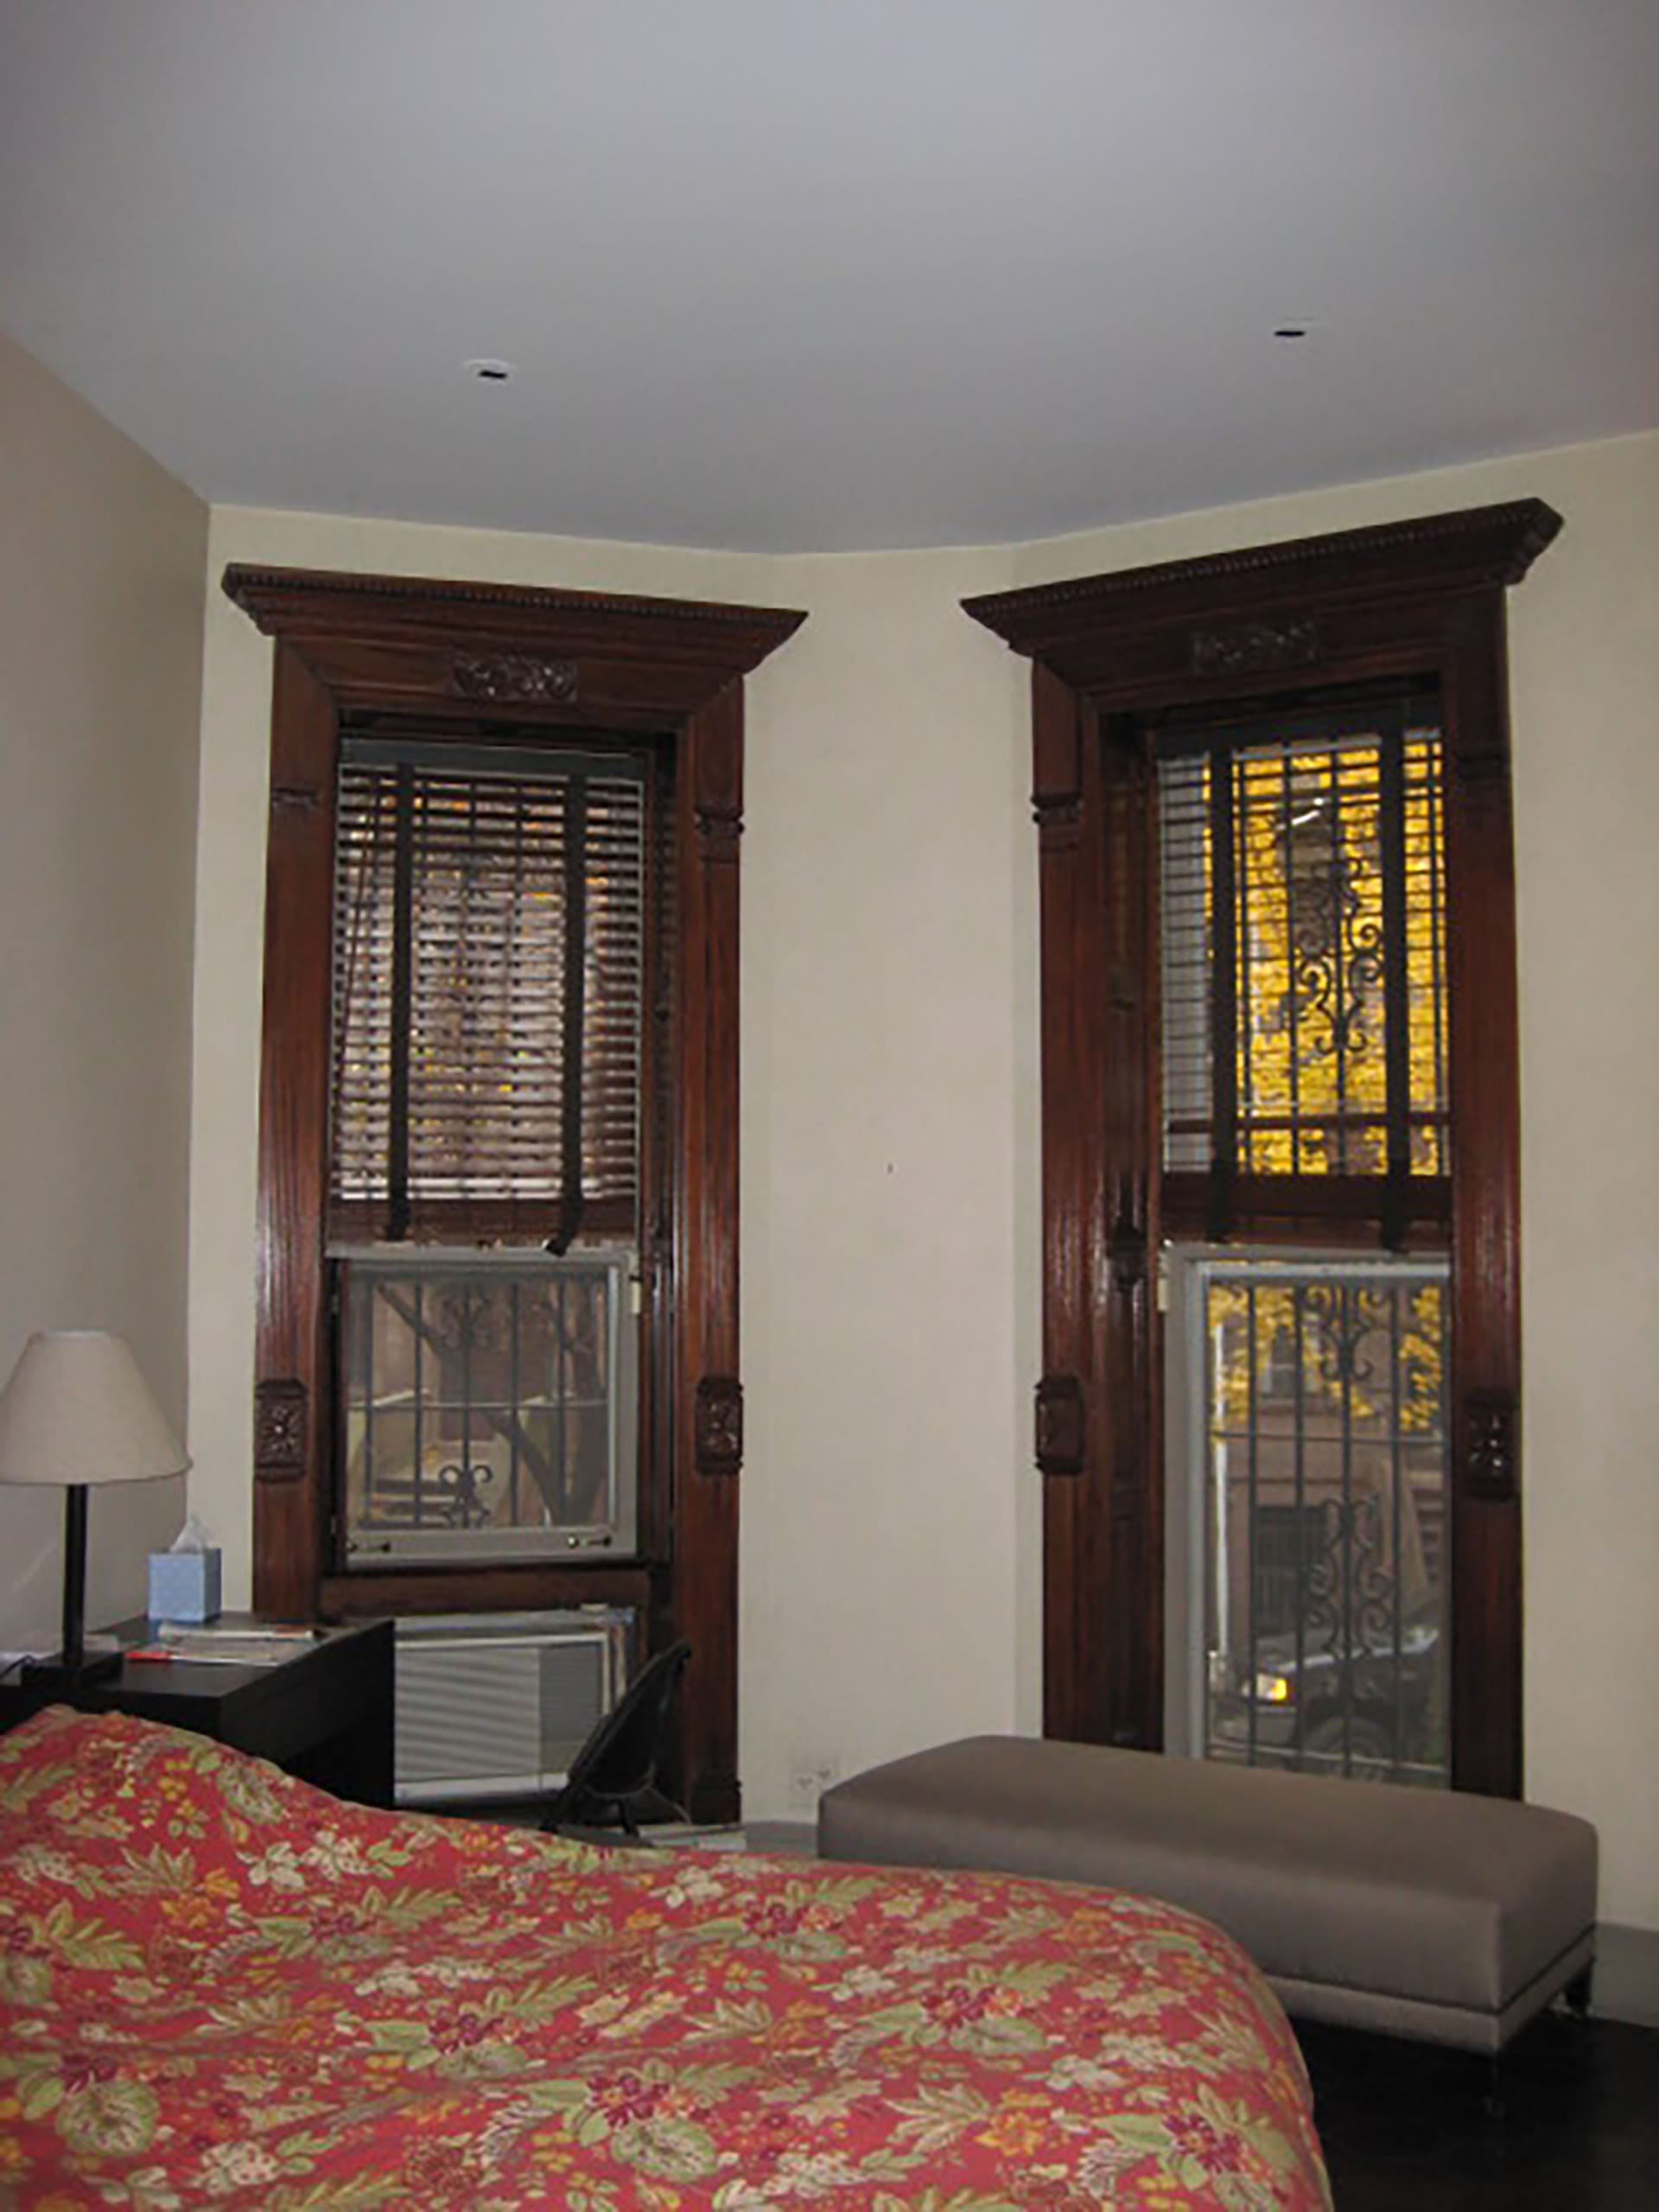 Room with bay windows at the front of an Upper West Side home before our renovation.